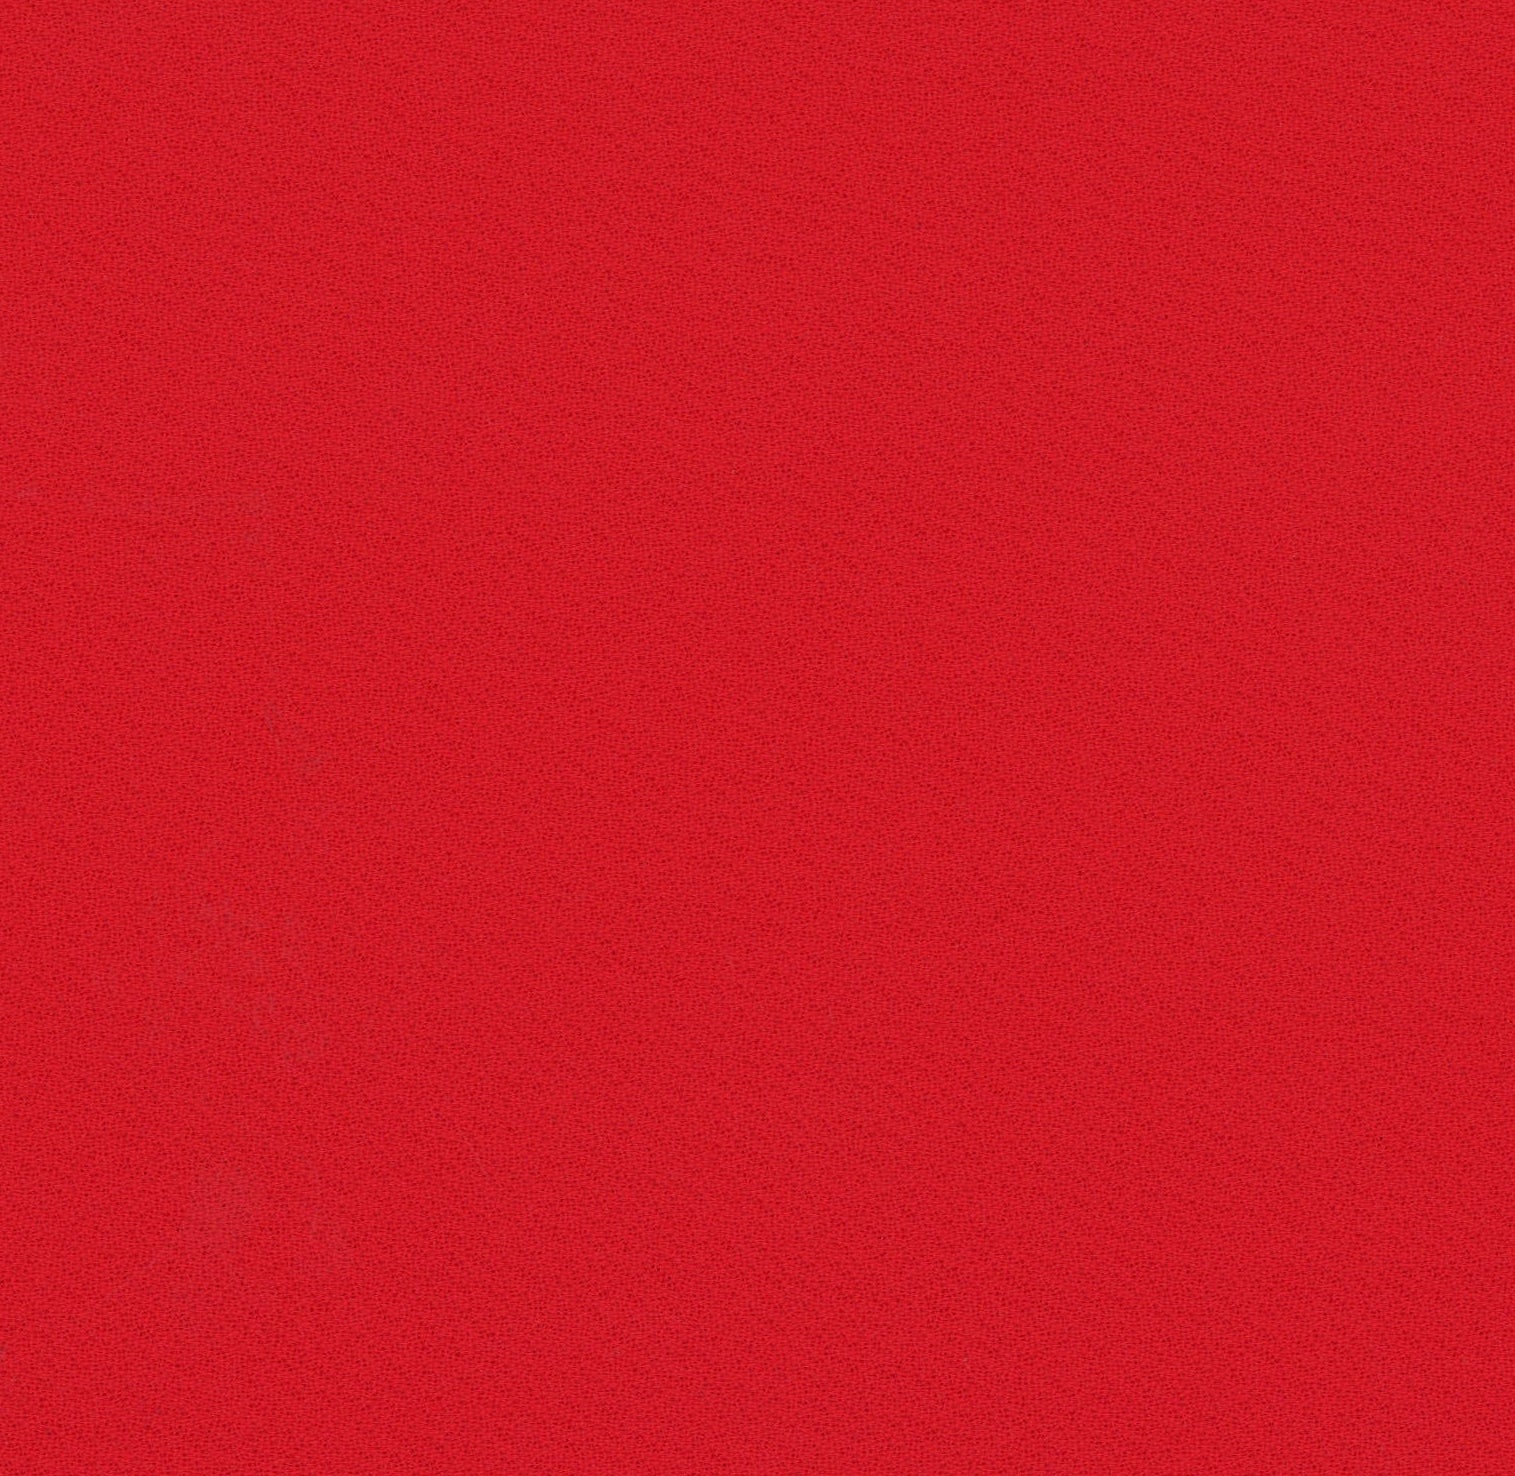 35005-09 Tomato Red Polyester Plain Dyed 280g/yd 54&quot; plain dyed polyester red woven Solid Color - knit fabric - woven fabric - fabric company - fabric wholesale - fabric b2b - fabric factory - high quality fabric - hong kong fabric - fabric hk - acetate fabric - cotton fabric - linen fabric - metallic fabric - nylon fabric - polyester fabric - spandex fabric - chun wing hing - cwh hk - fabric worldwide ship - 針織布 - 梳織布 - 布料公司- 布料批發 - 香港布料 - 秦榮興